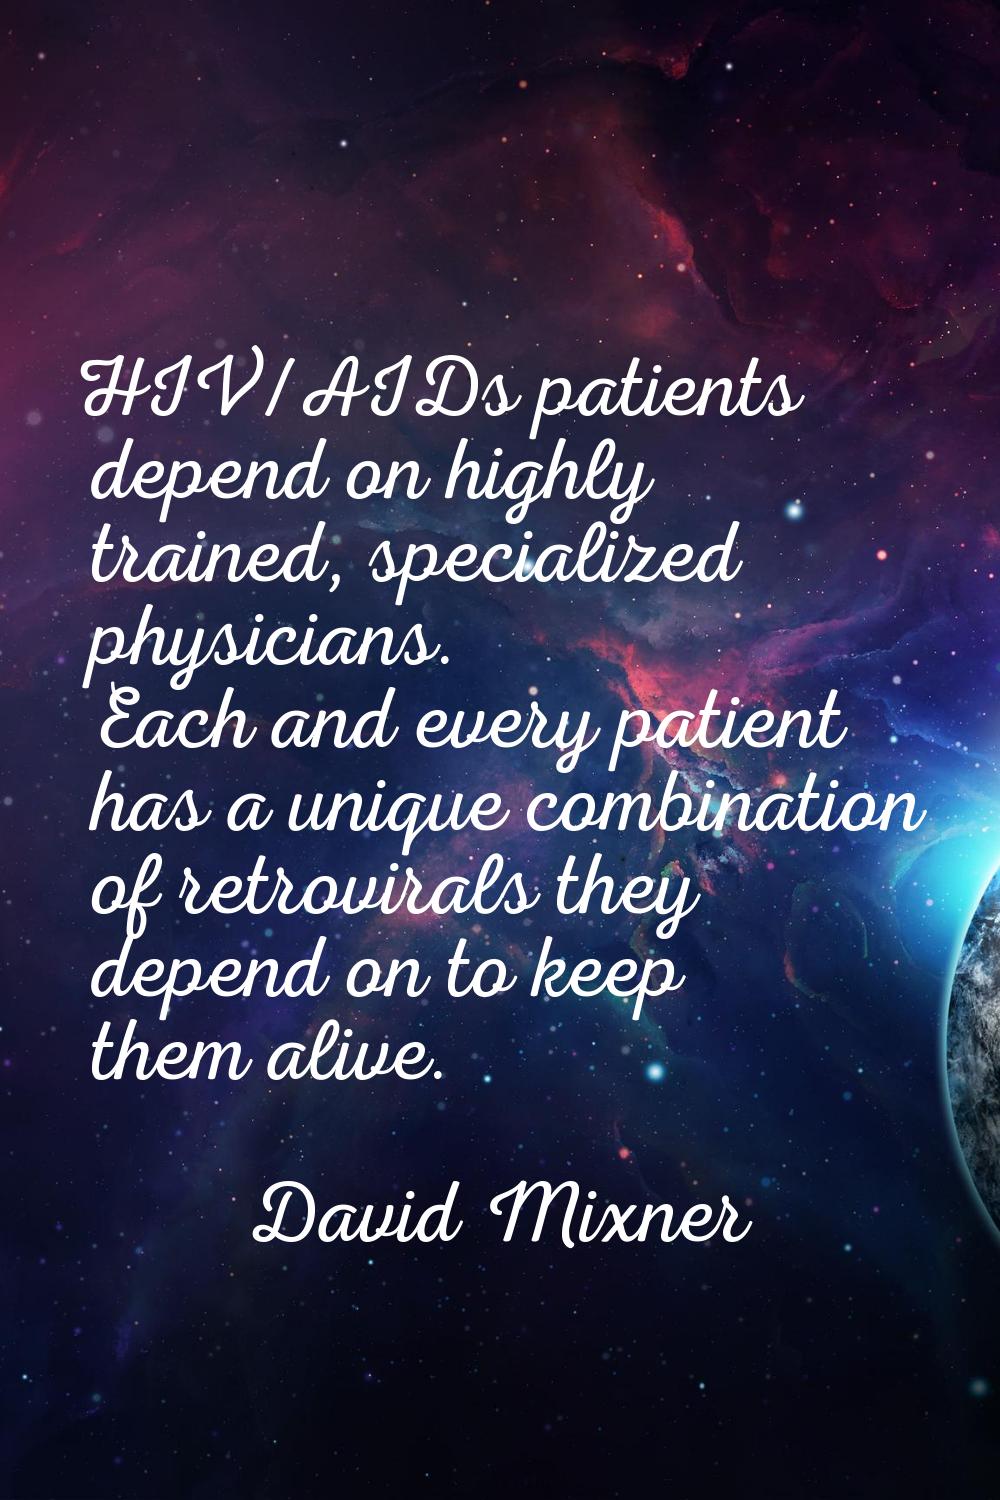 HIV/AIDs patients depend on highly trained, specialized physicians. Each and every patient has a un